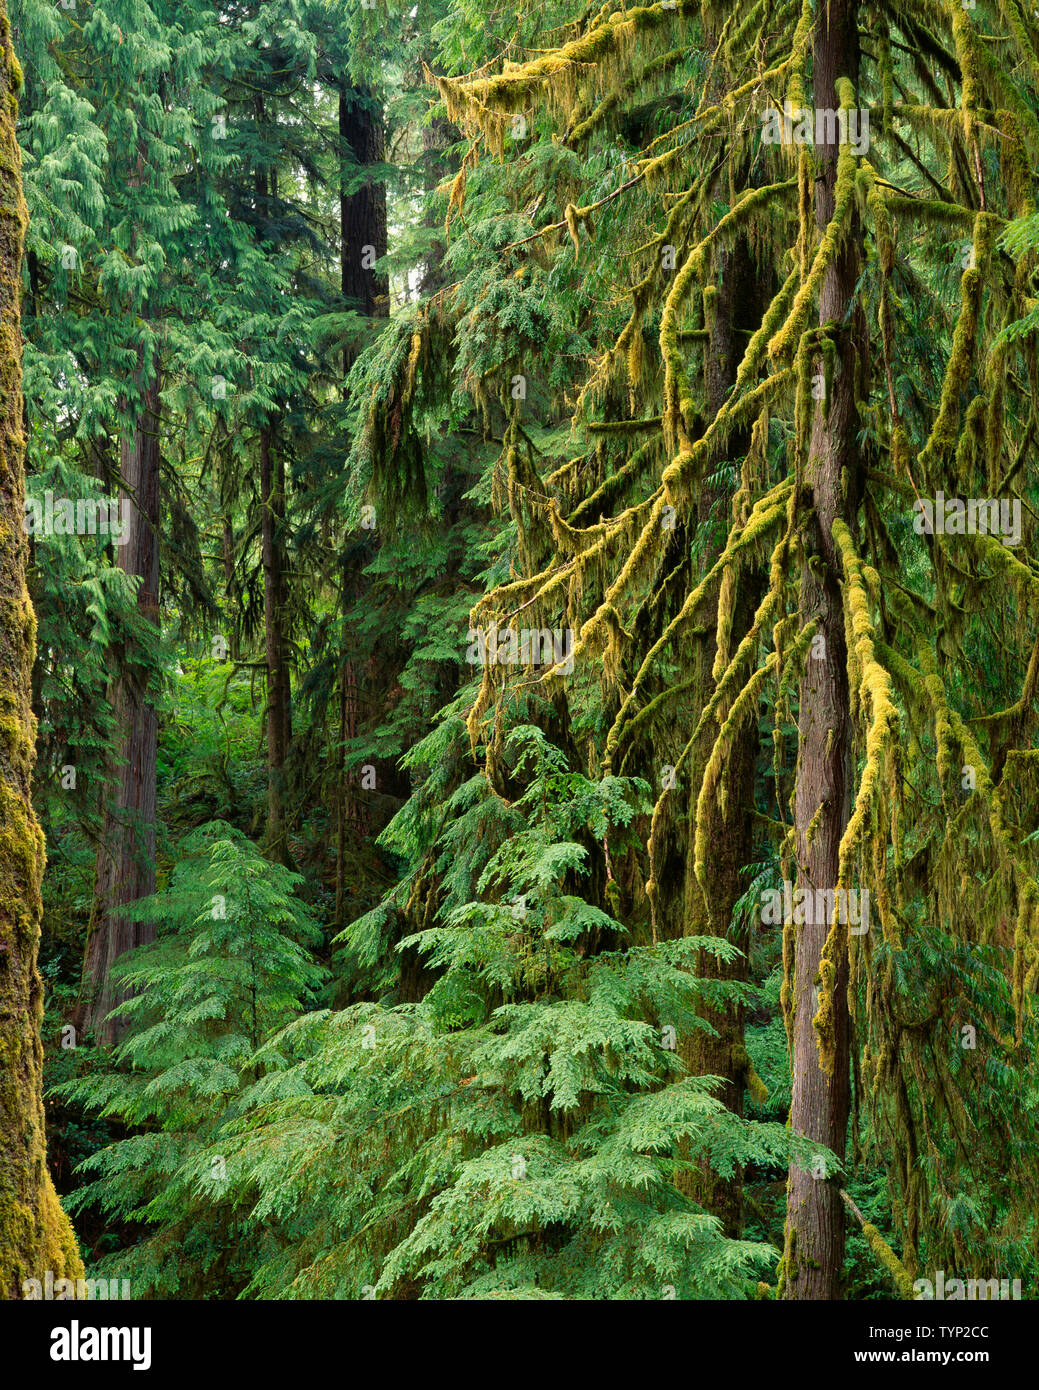 USA, Washington, Olympic National Park, Temperate coniferous rainforest with Sitka spruce, Douglas fir and western hemlock; Quinault Rain Forest. Stock Photo